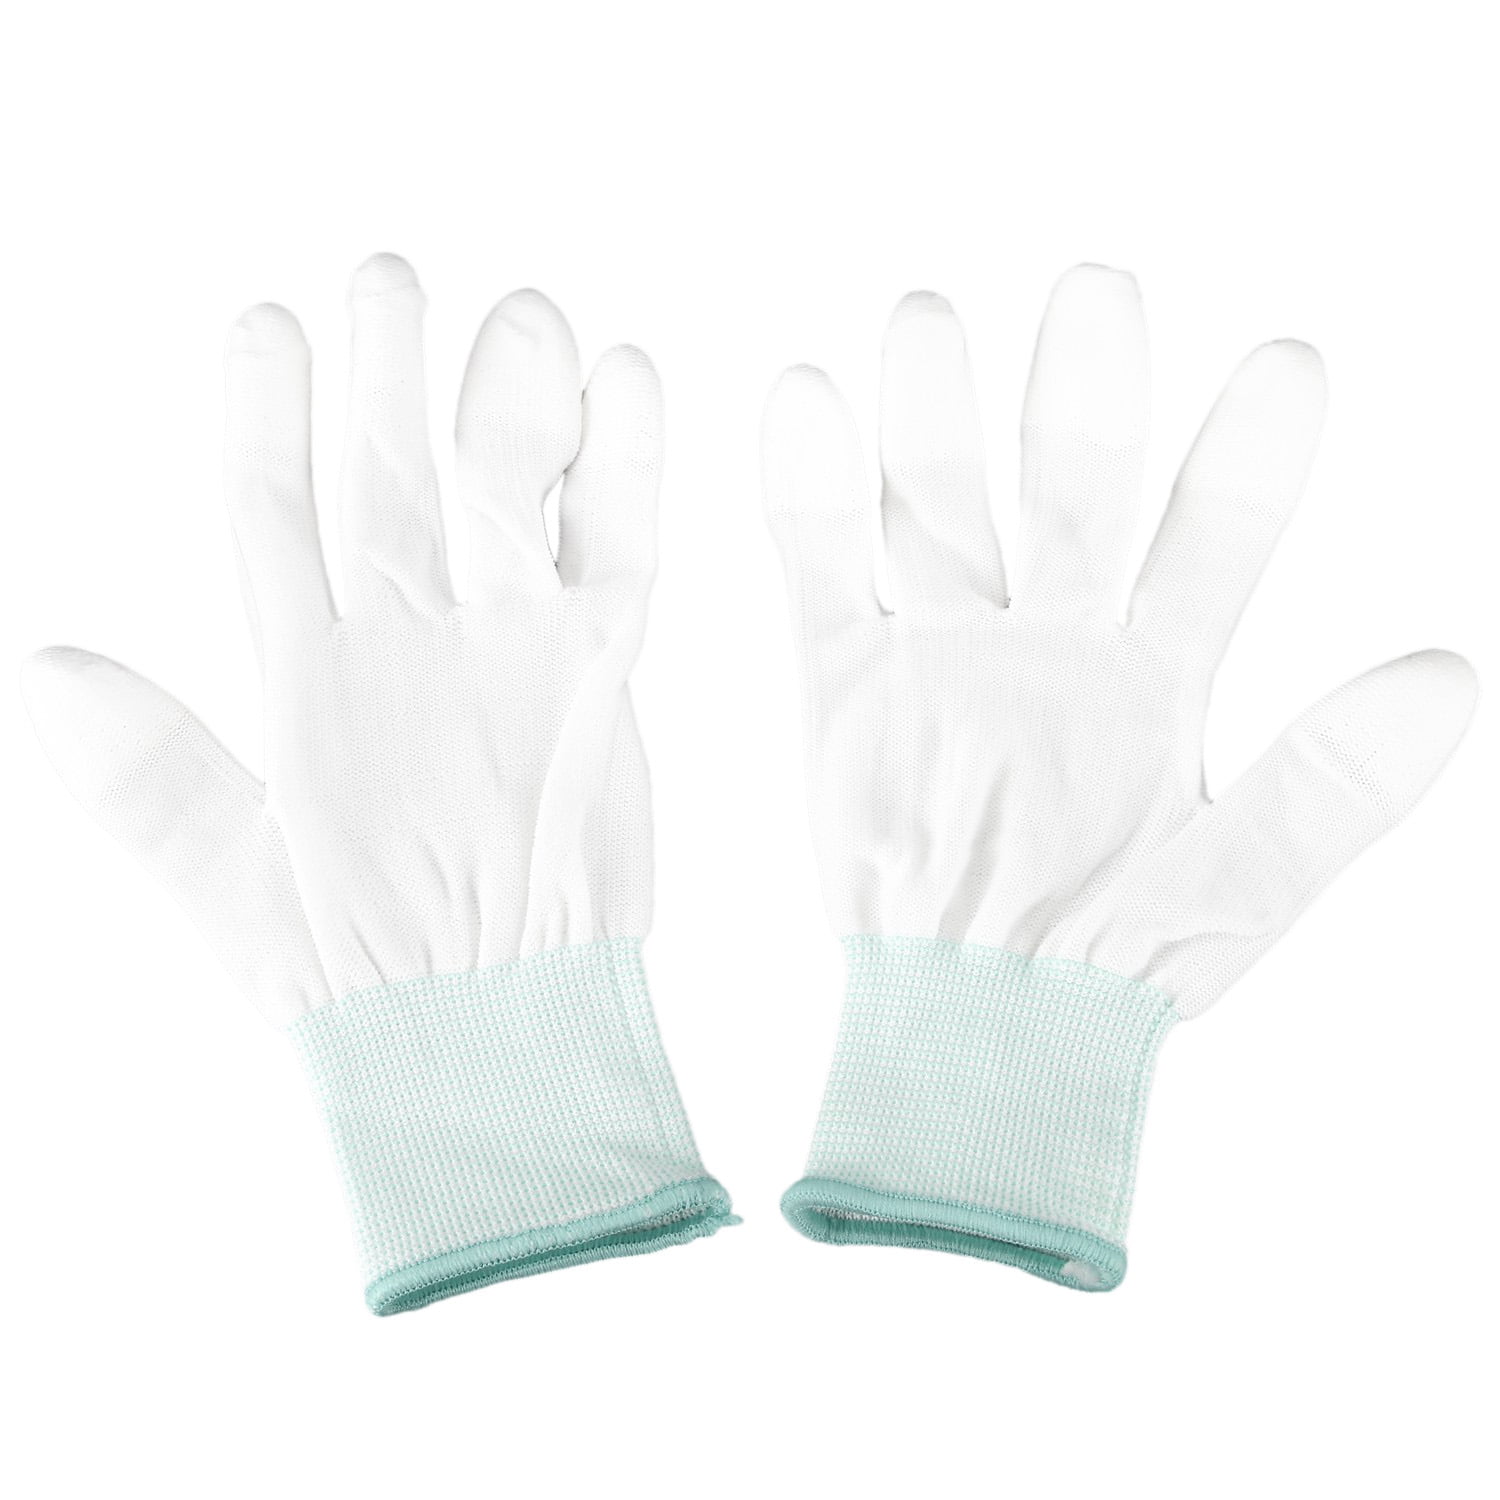 5 pairs ESD Anti-Static and Anti-Skid Gloves-Palm coated Size:S 